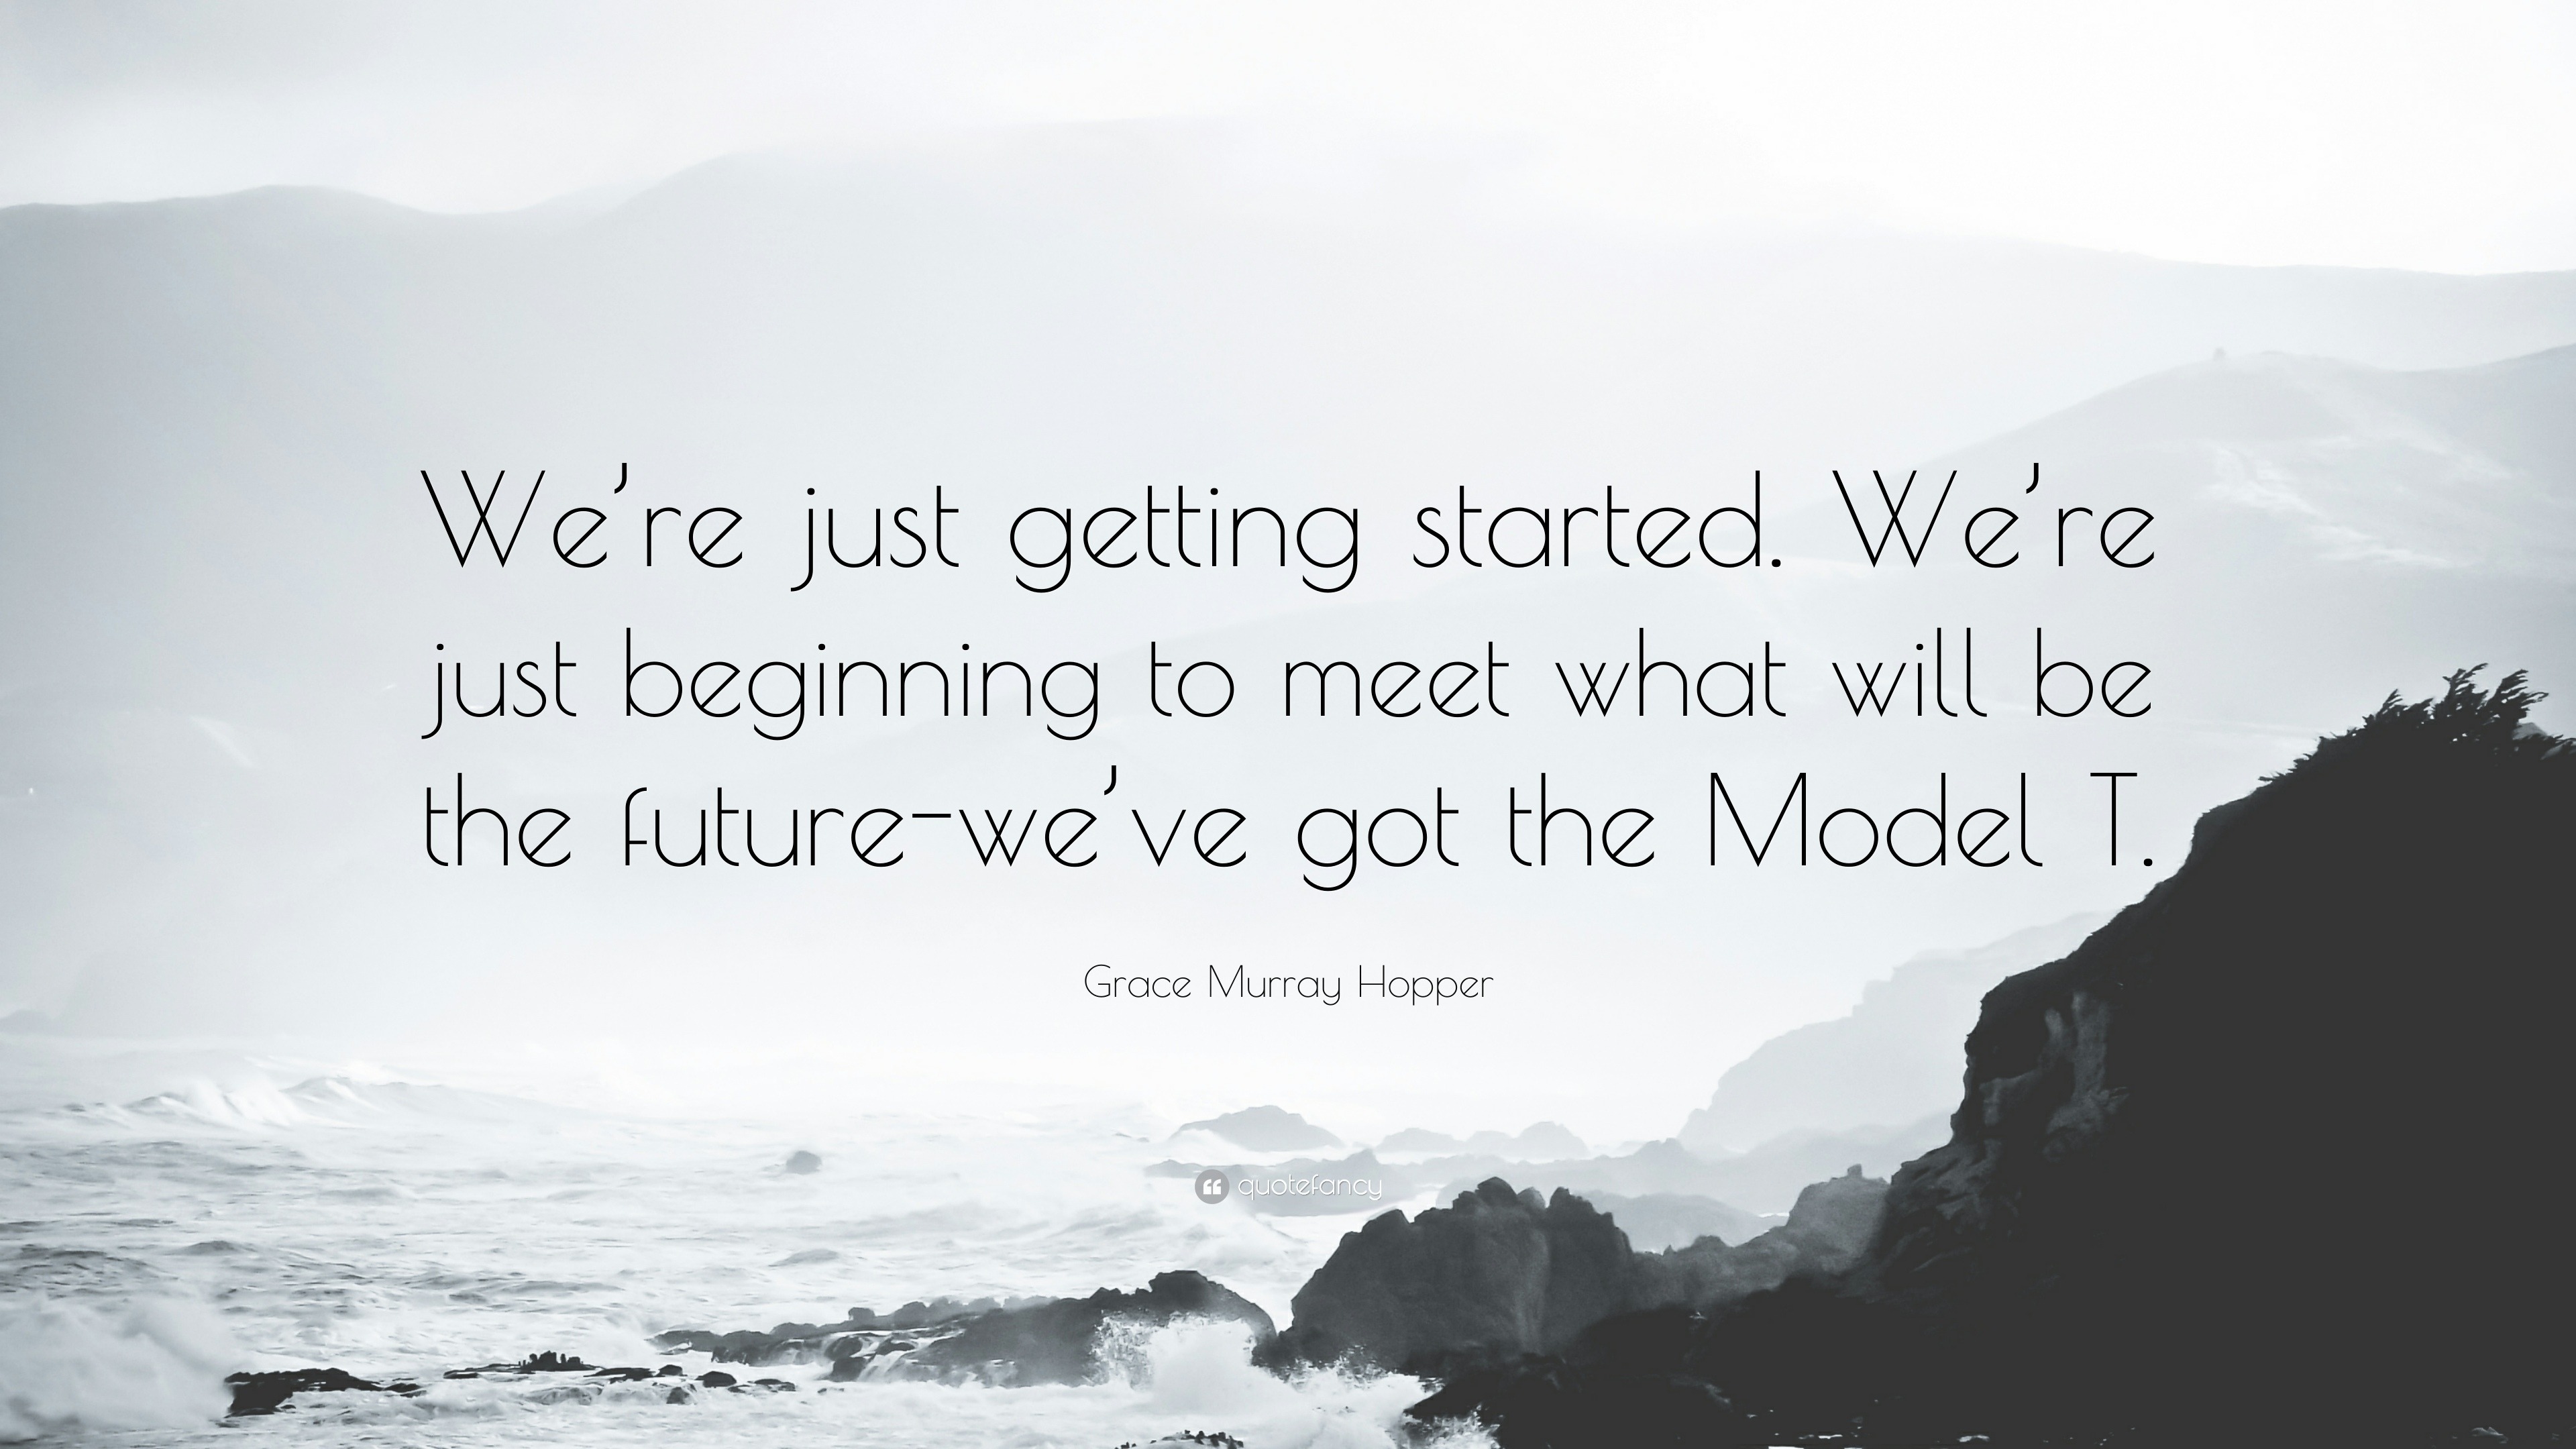 https://quotefancy.com/media/wallpaper/3840x2160/959043-Grace-Murray-Hopper-Quote-We-re-just-getting-started-We-re-just.jpg